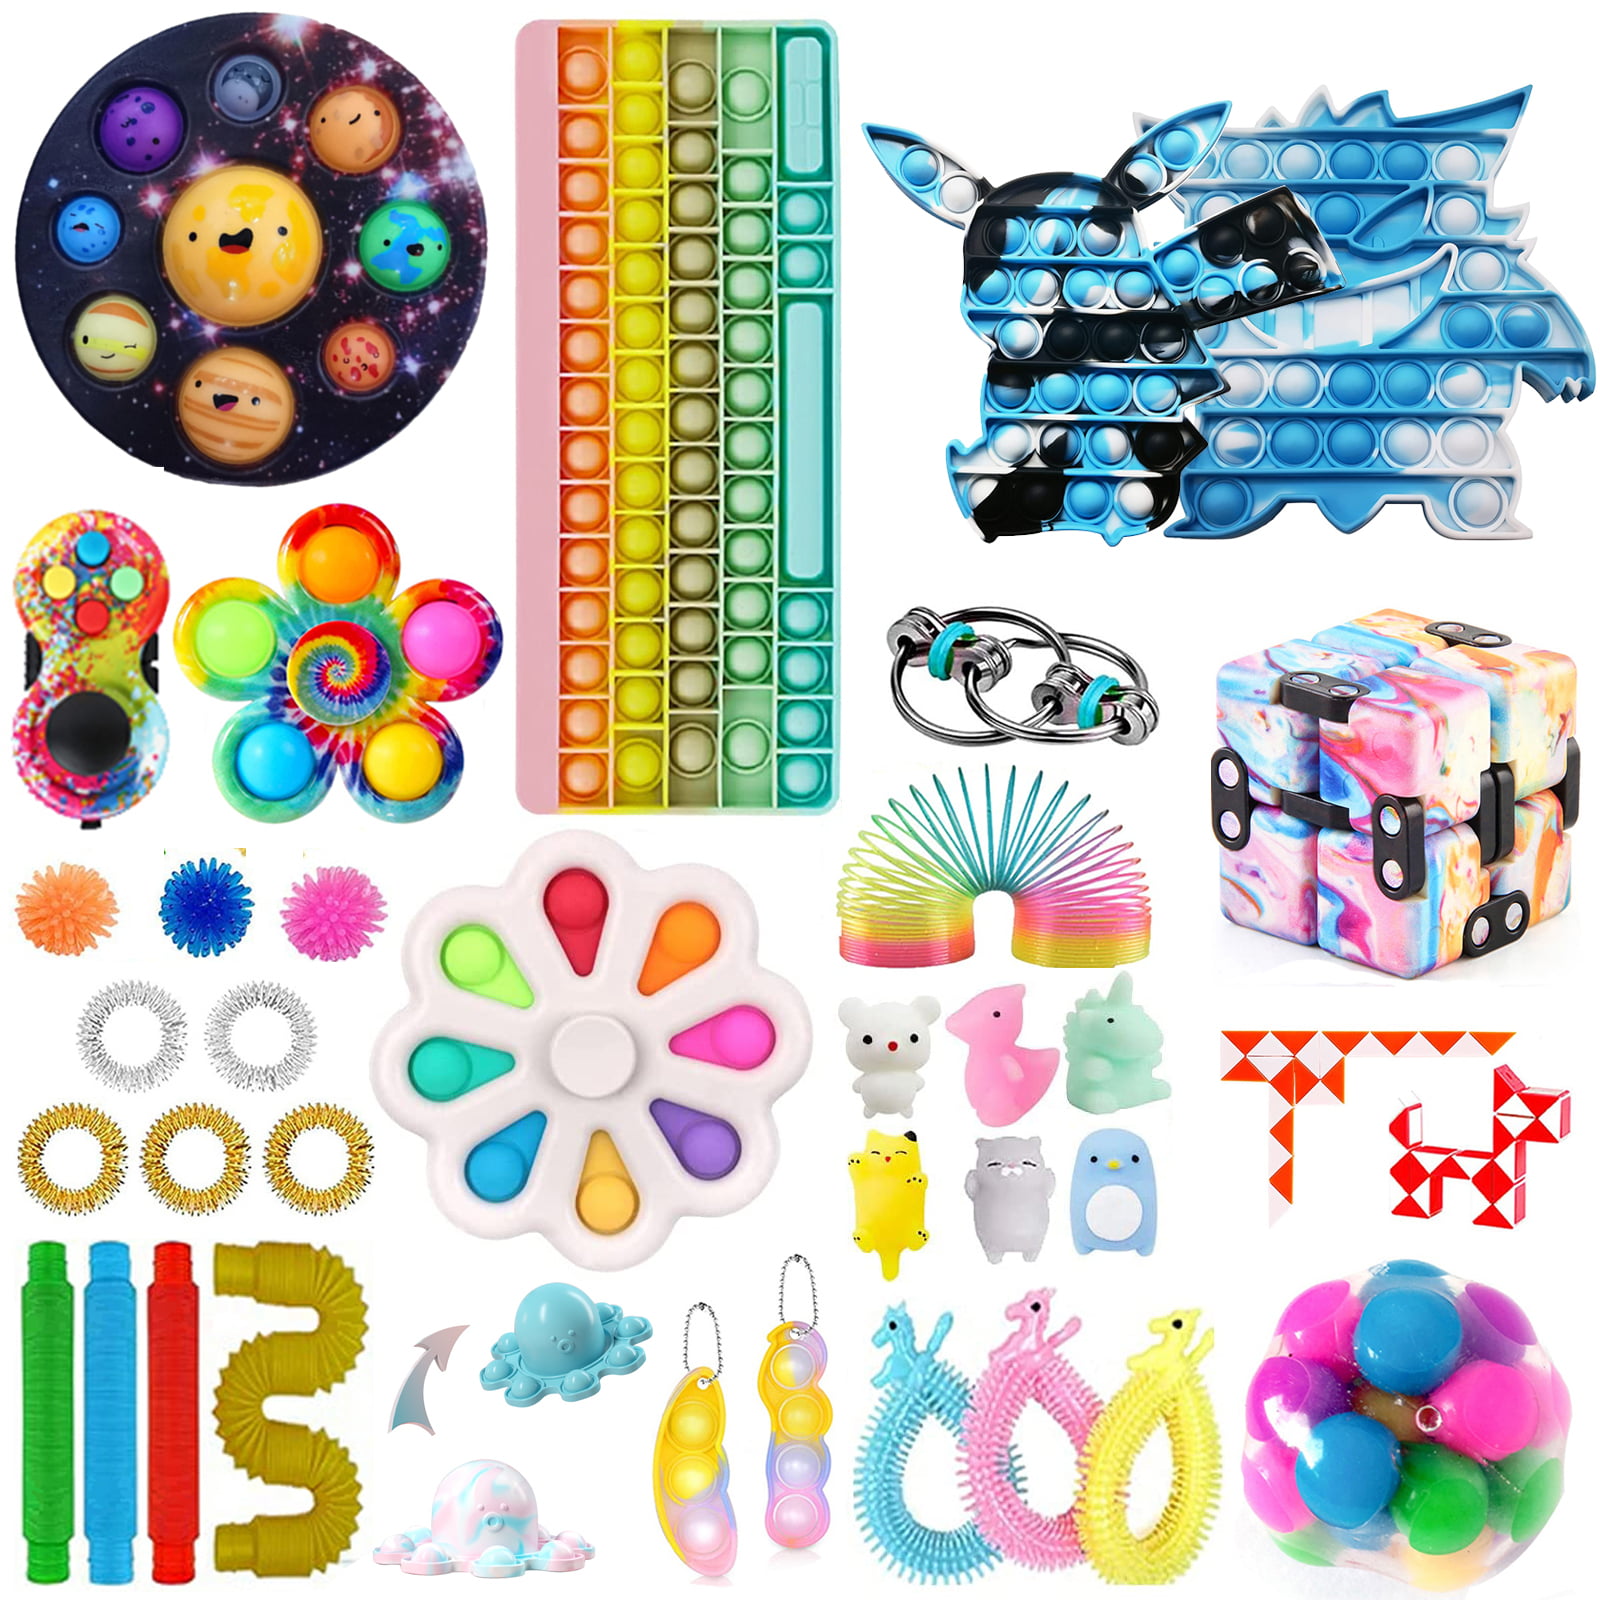 Fidget Package A Dourbesty 37Pcs Fidget Packs Fidget Toy Set Cheap Big Keyboard Rainbow Sensory Pop Fidget Toys Pack with Pop Tube Dimple Spinner Figetgets Stress Relief Toys for Party Supplies